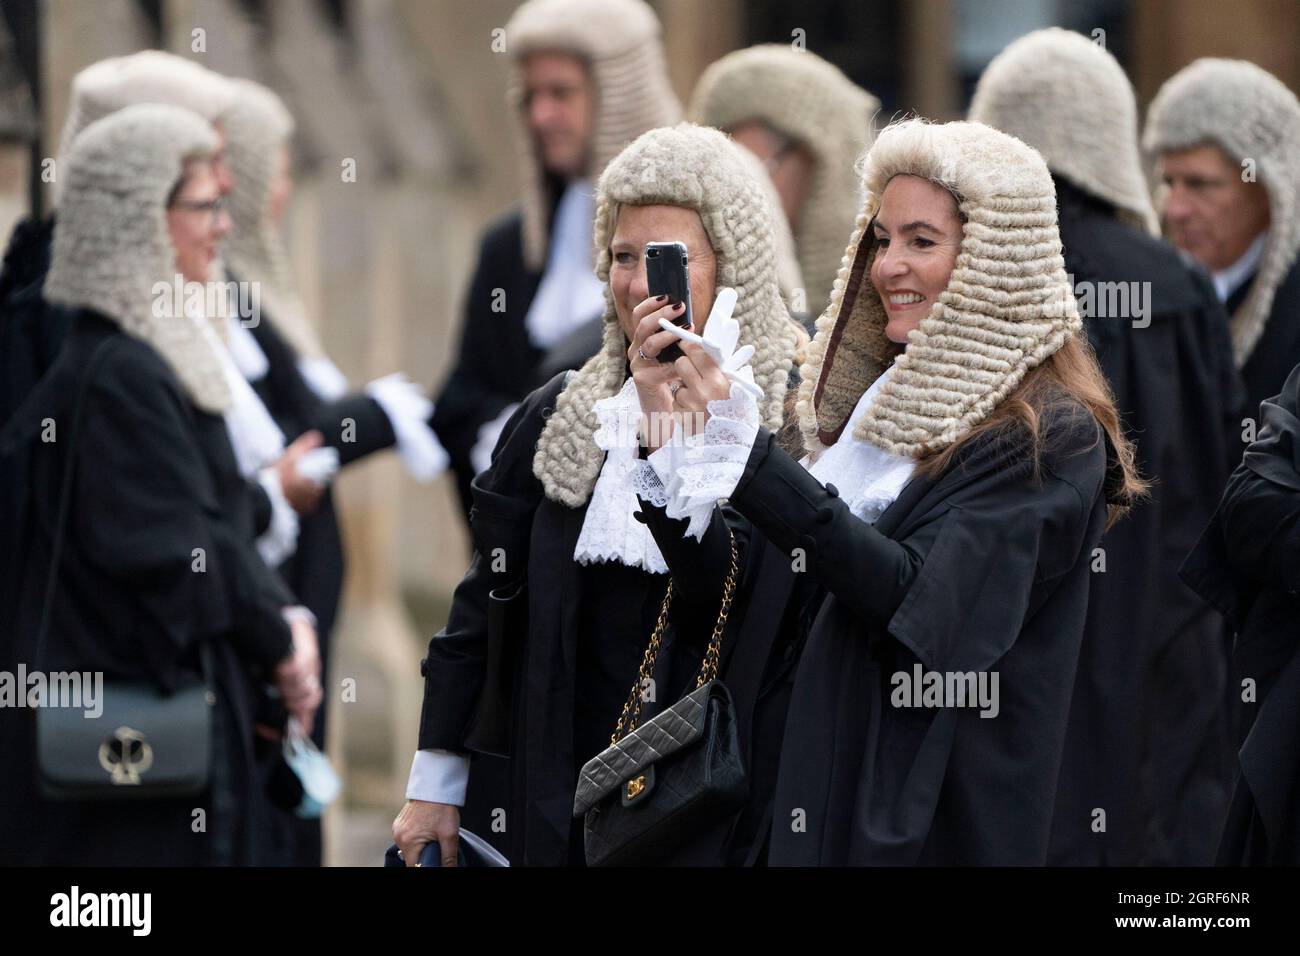 LONDON - OCTOBER 1: A member of the Judiciary takes a photo of her colleagues wearing their robe of office. The annual Judges Service took place at Westminster Abbey in London today, October 1, 2021. At the start of the legal year the Lord Chancellor, Dominic Raab wearing the robes of his office as Lord Chancellor, arrives at Westminster Abbey. Judges, Q.CÕs and senior legal figures, walk in a procession from Westminster Abbey to the Houses of Parliament, for a reception hosted by the Lord Chancellor. The custom dates back to the Middle Ages, when the judges prayed for guidance at the start of Stock Photo